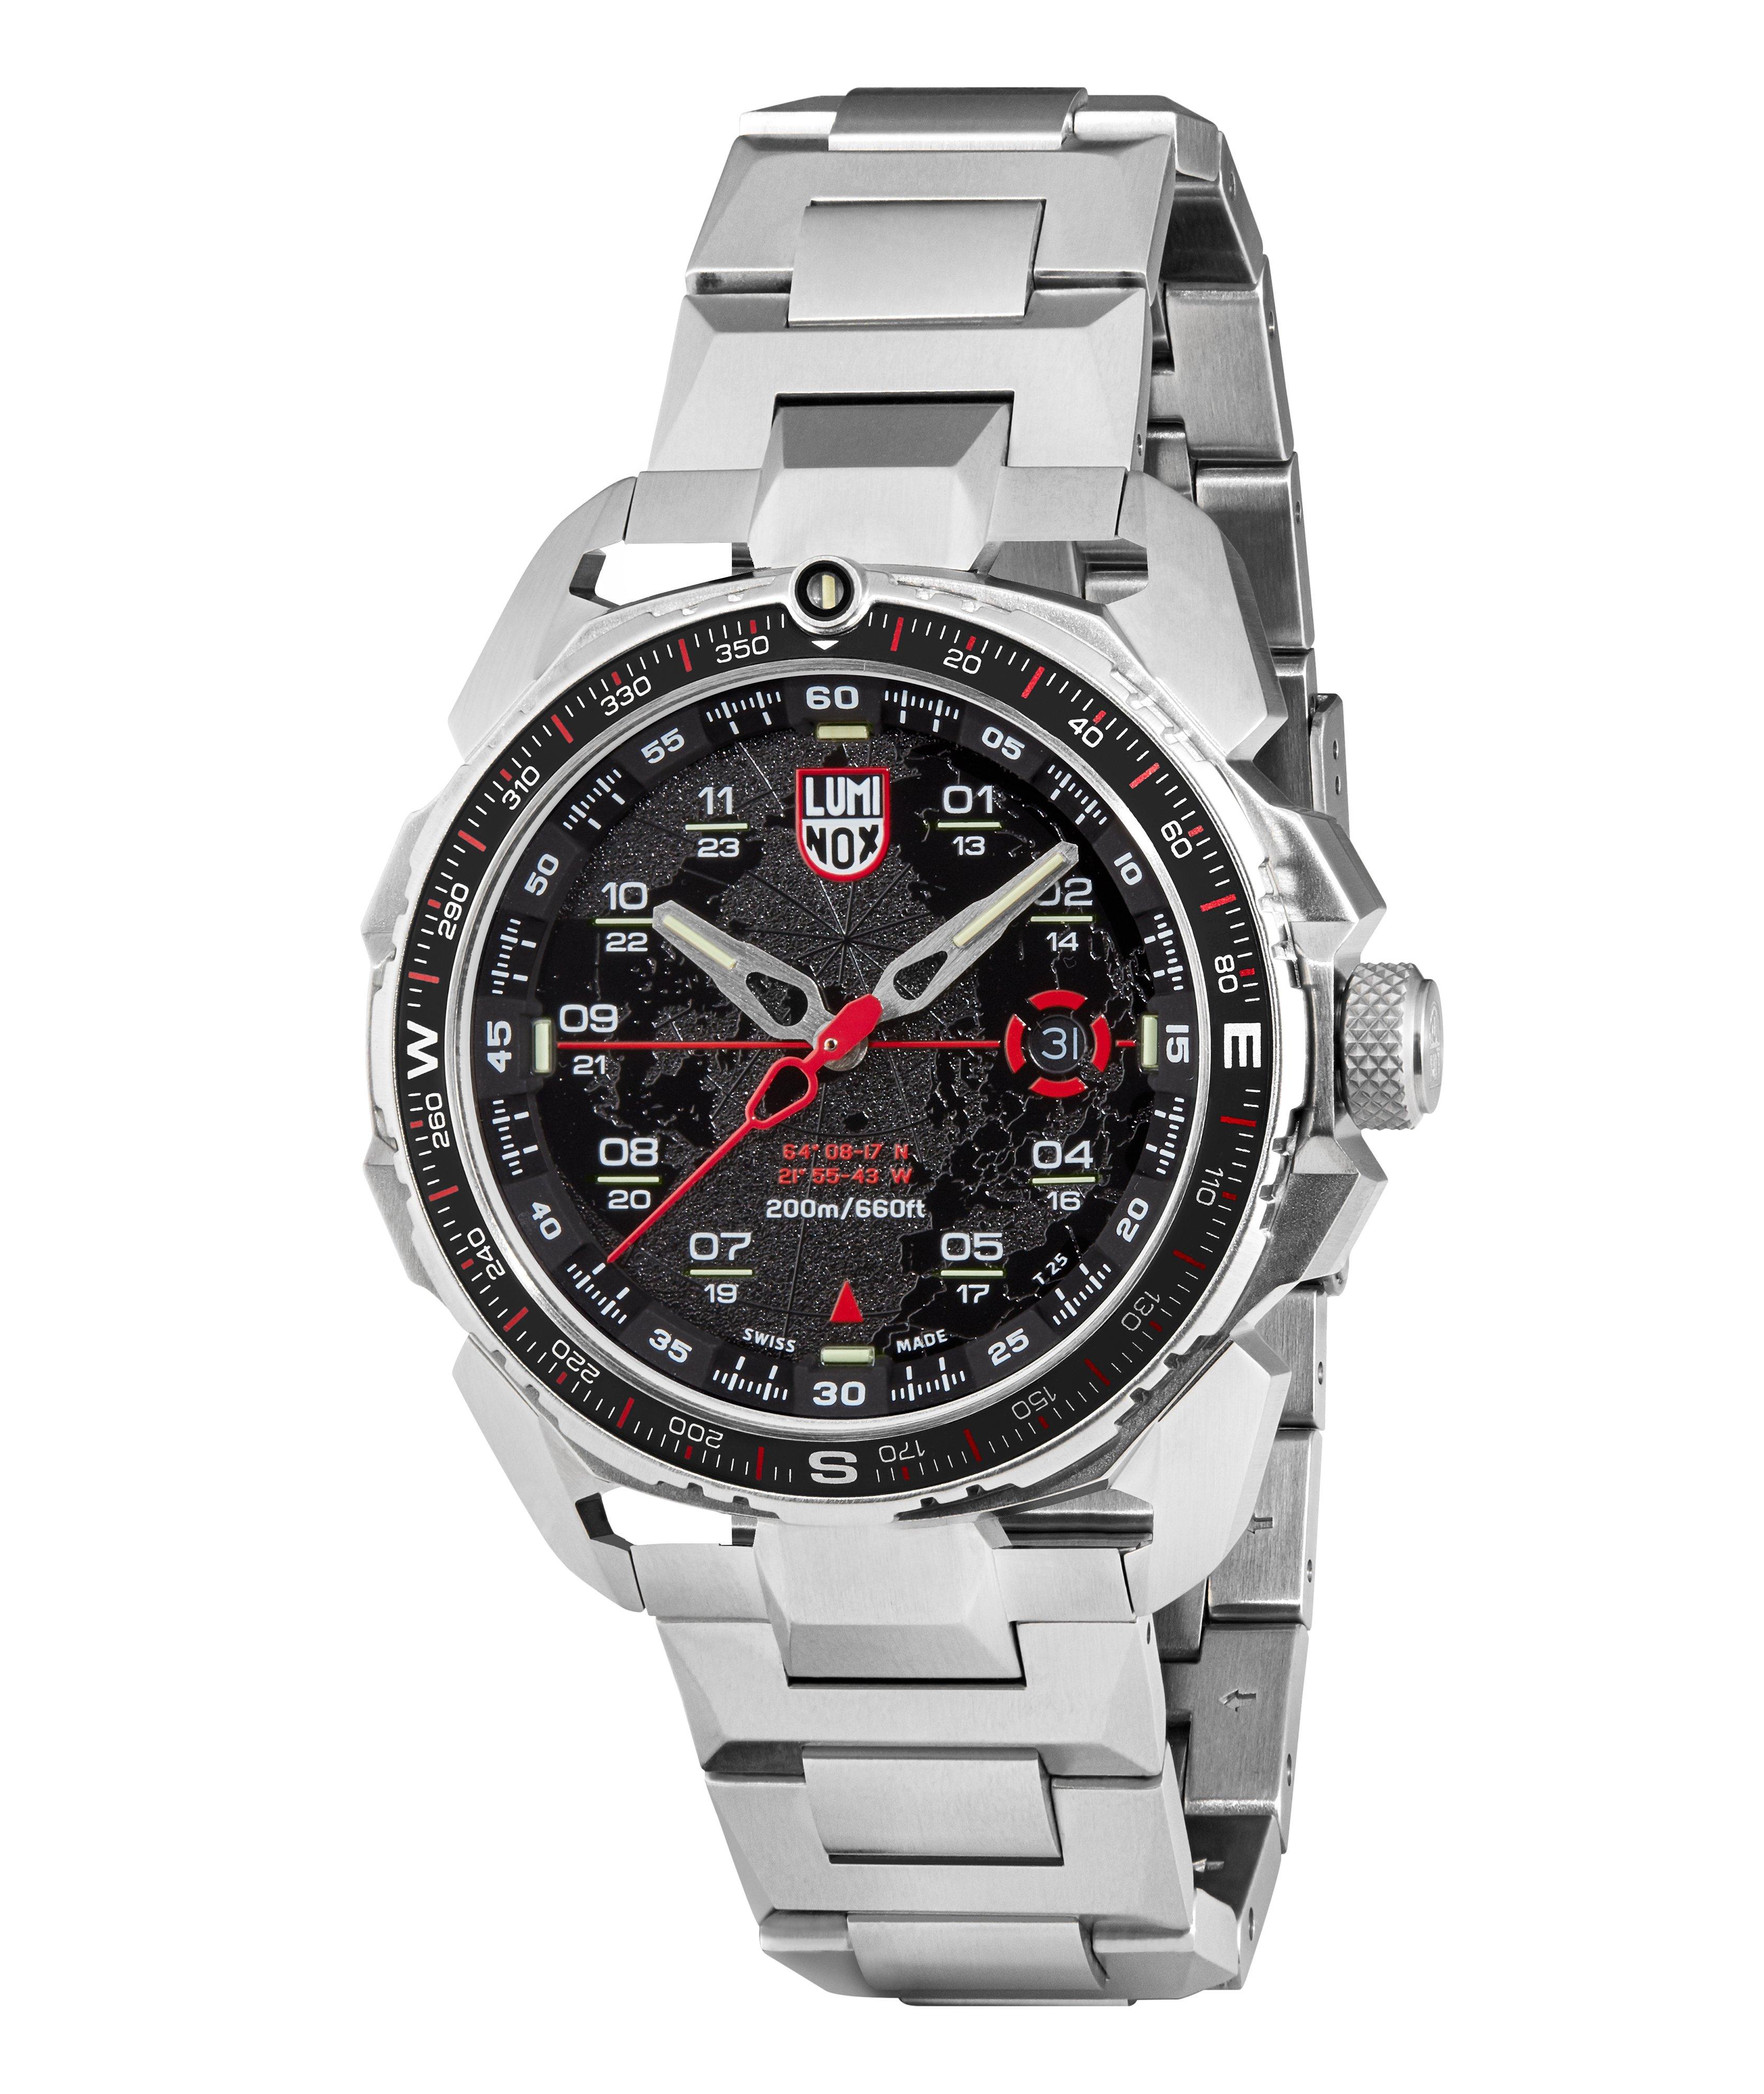 Montre 1202, collection Ice-Sar Arctic image 0